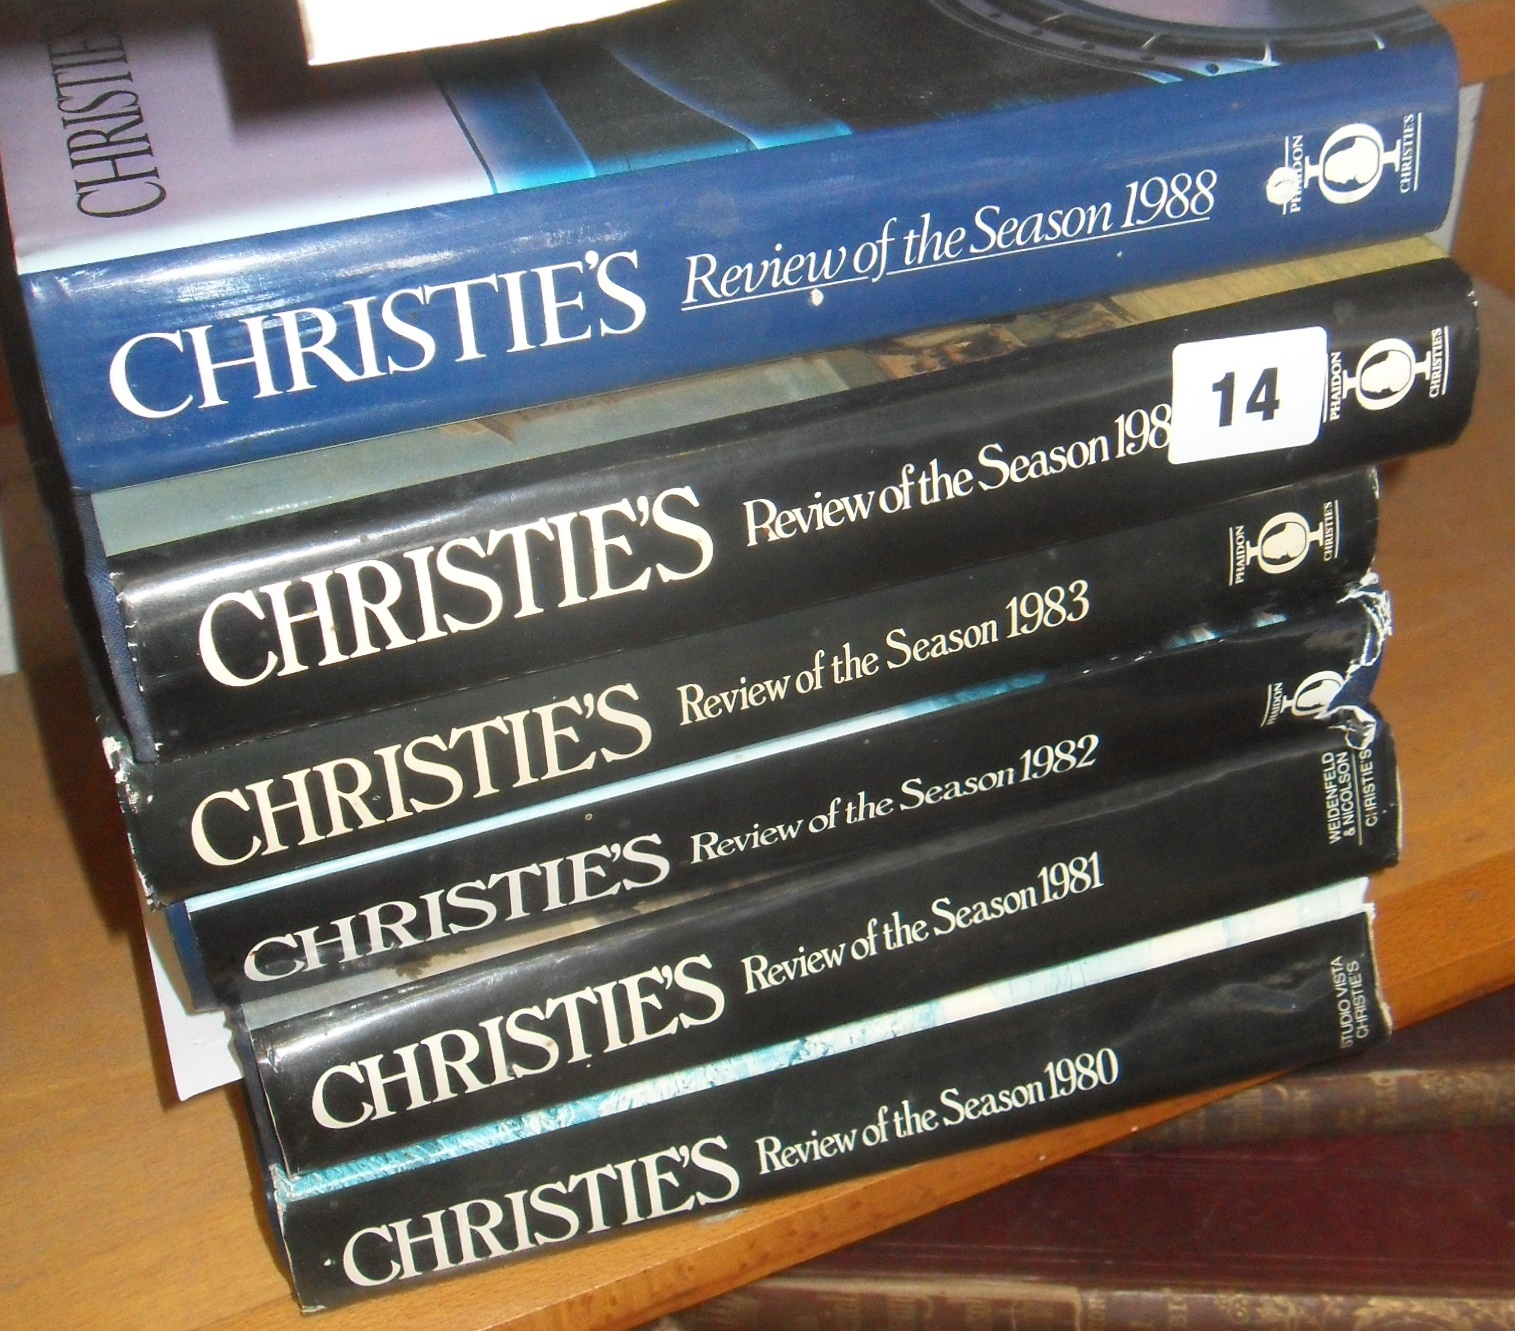 Six Christies Review of the Year books, c. 1980's